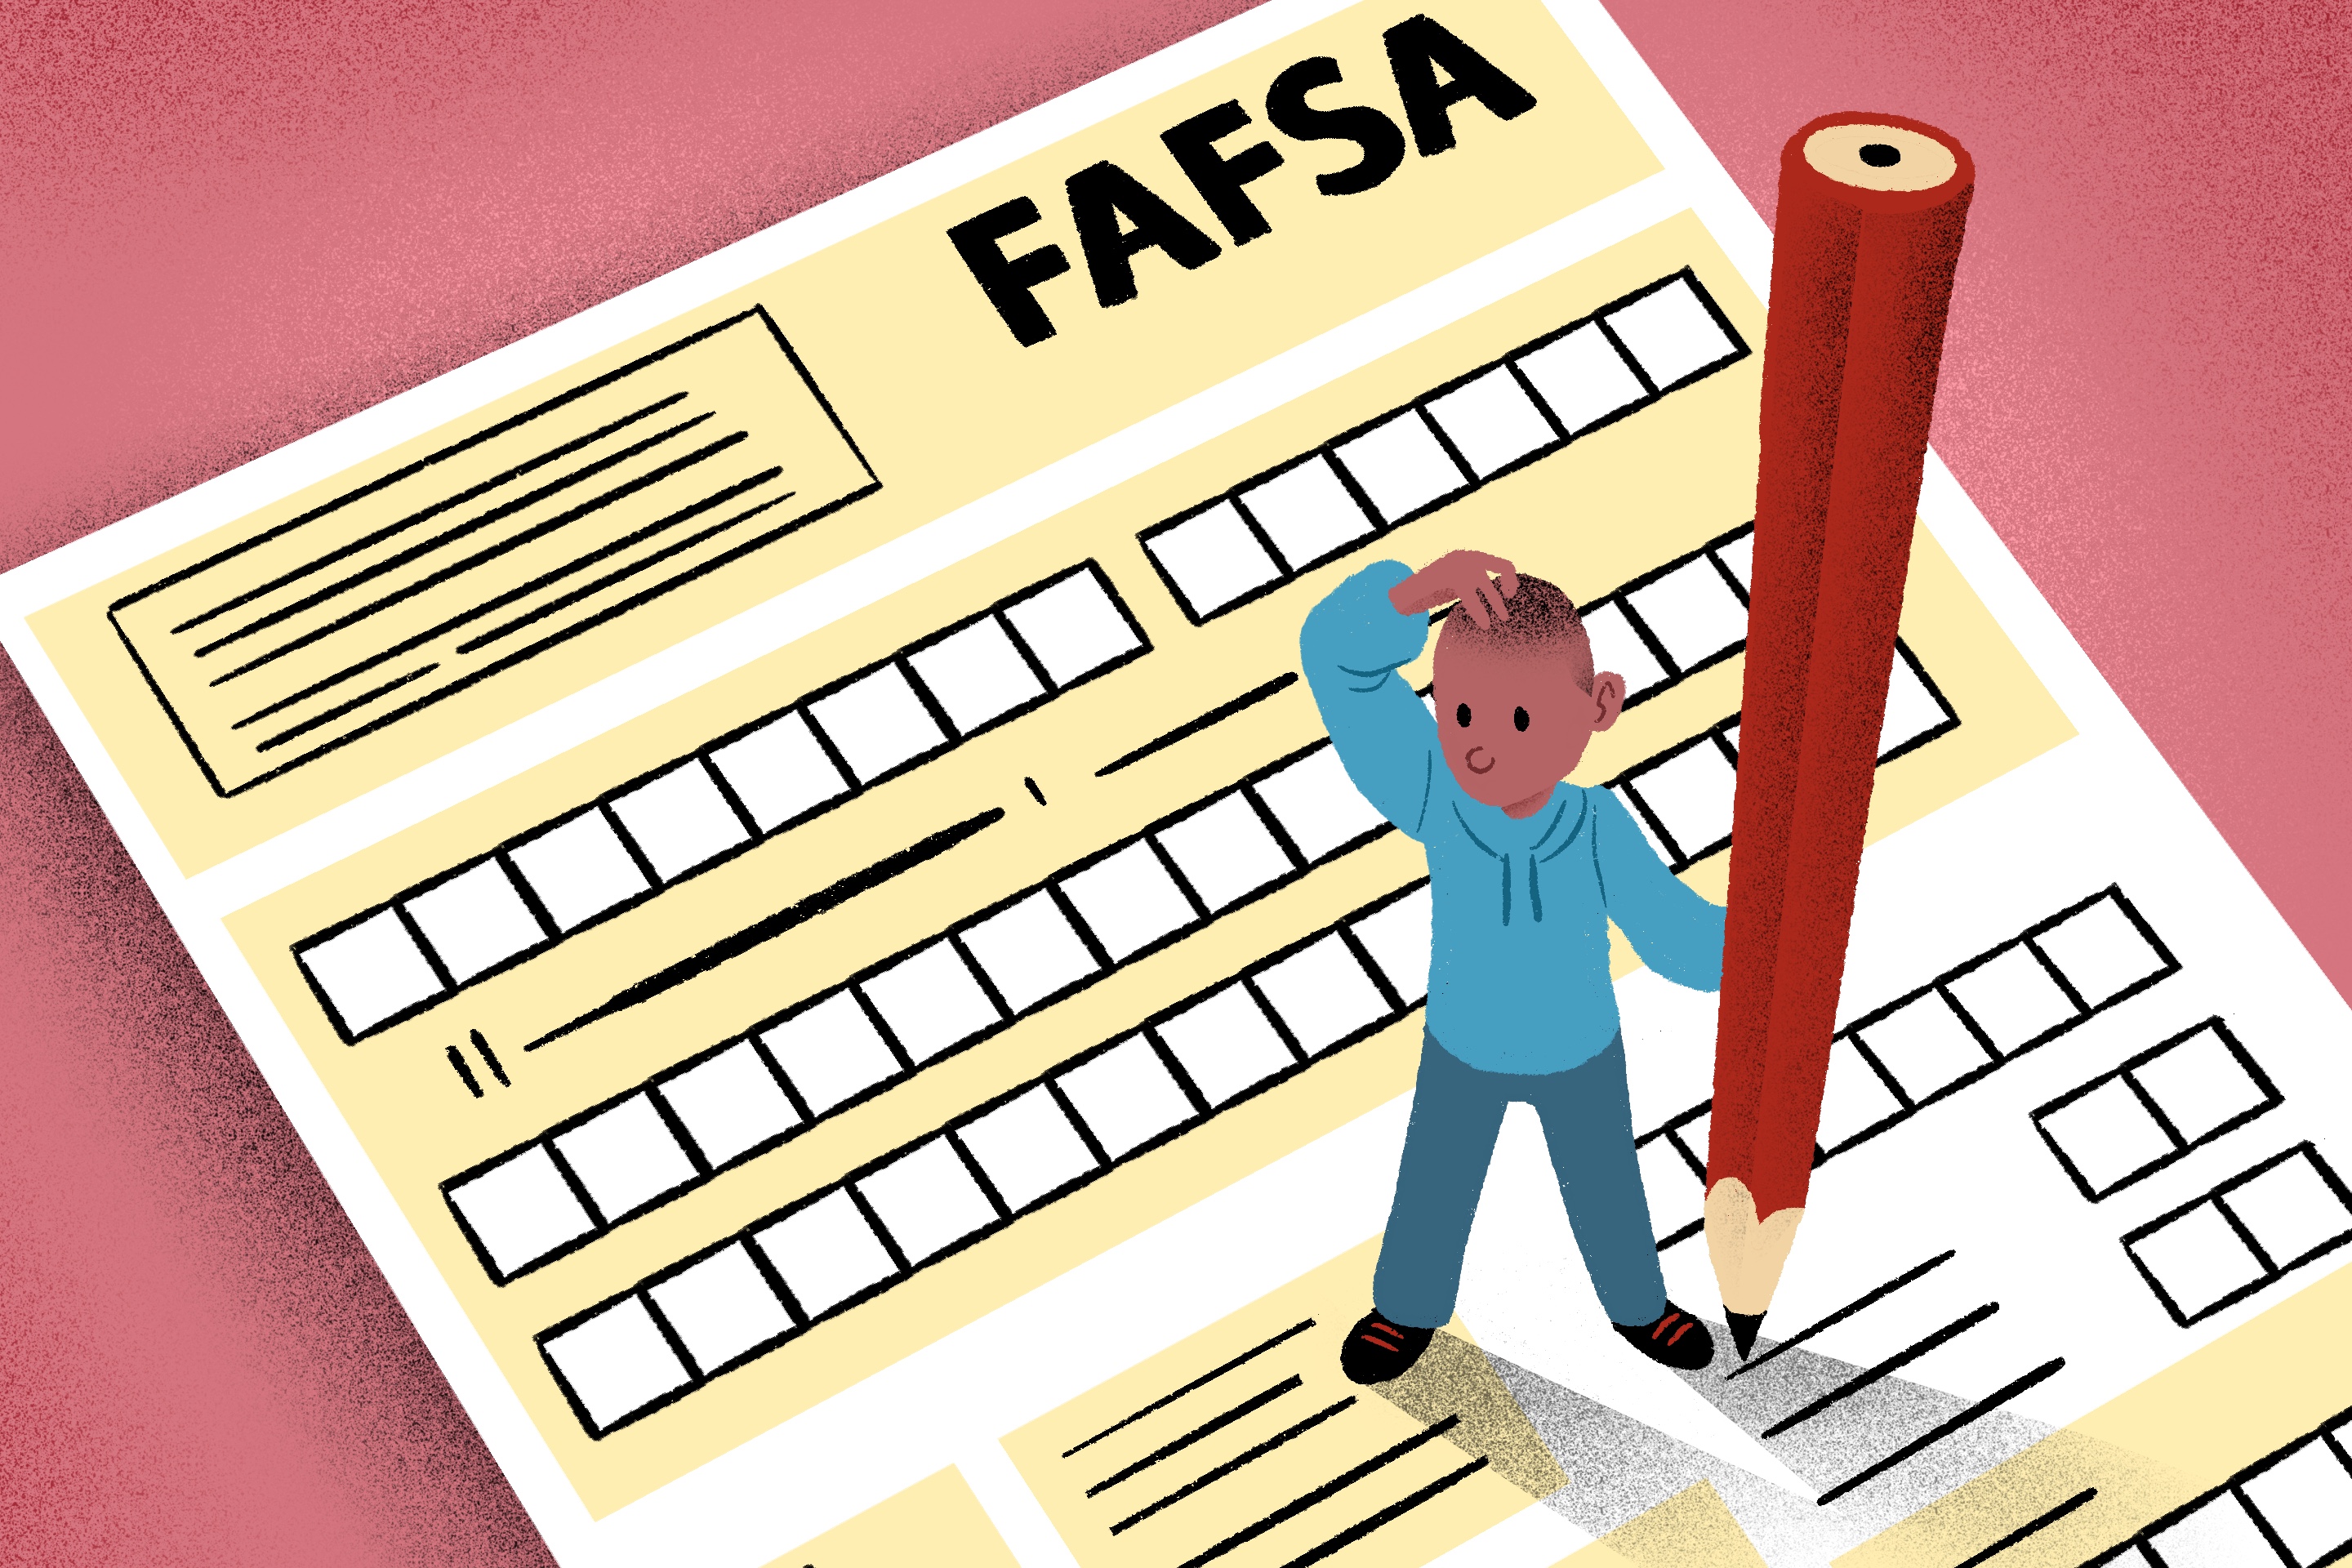 9 Mistakes to Avoid When Applying for Federal Financial Aid